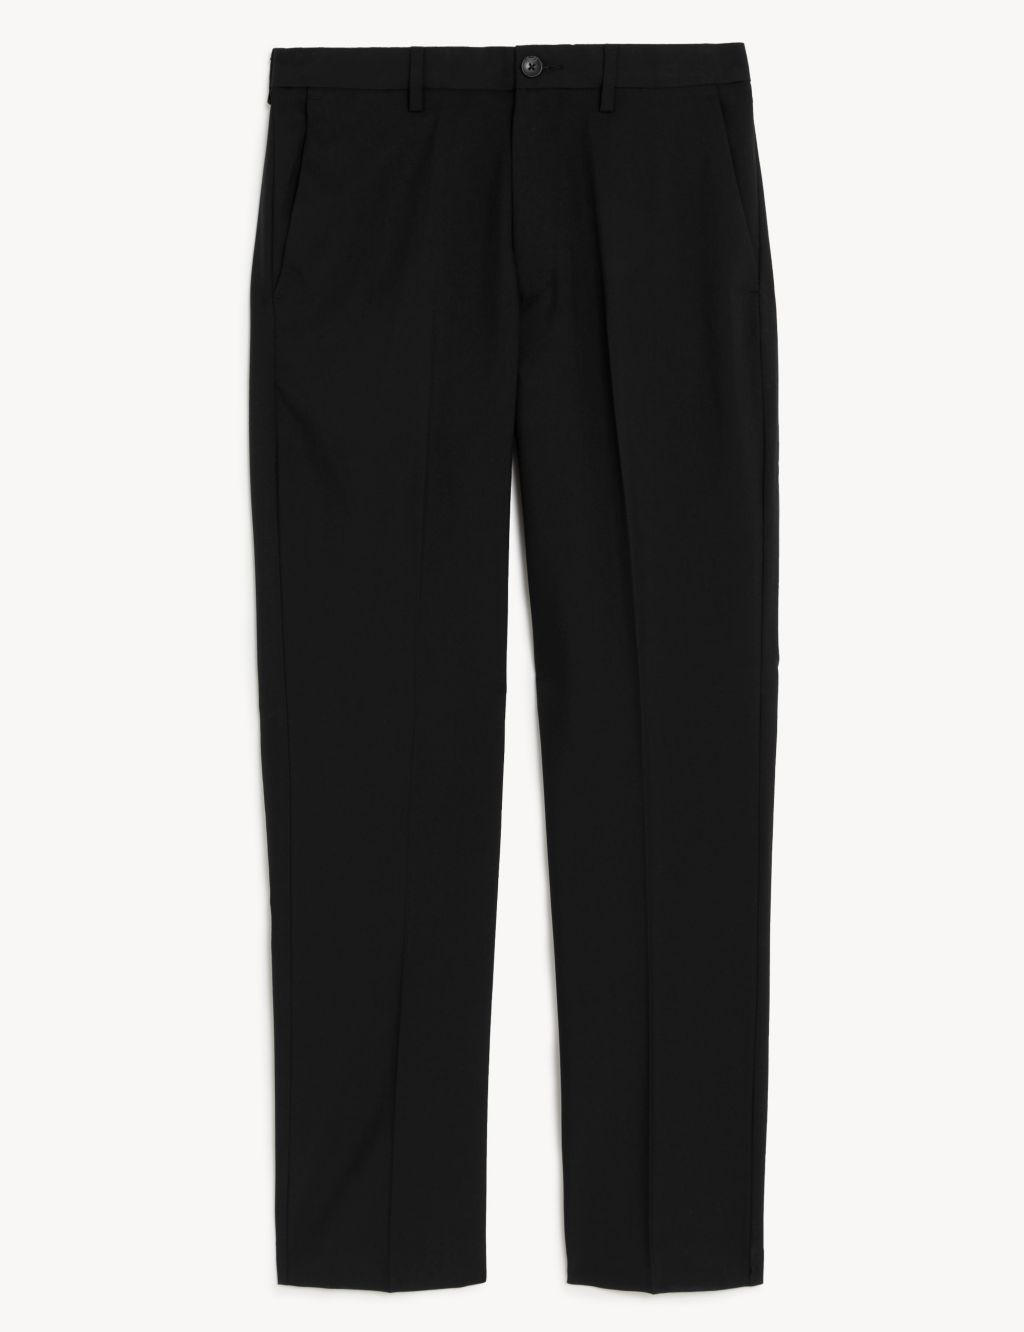 Regular Fit Trouser with Active Waist image 7